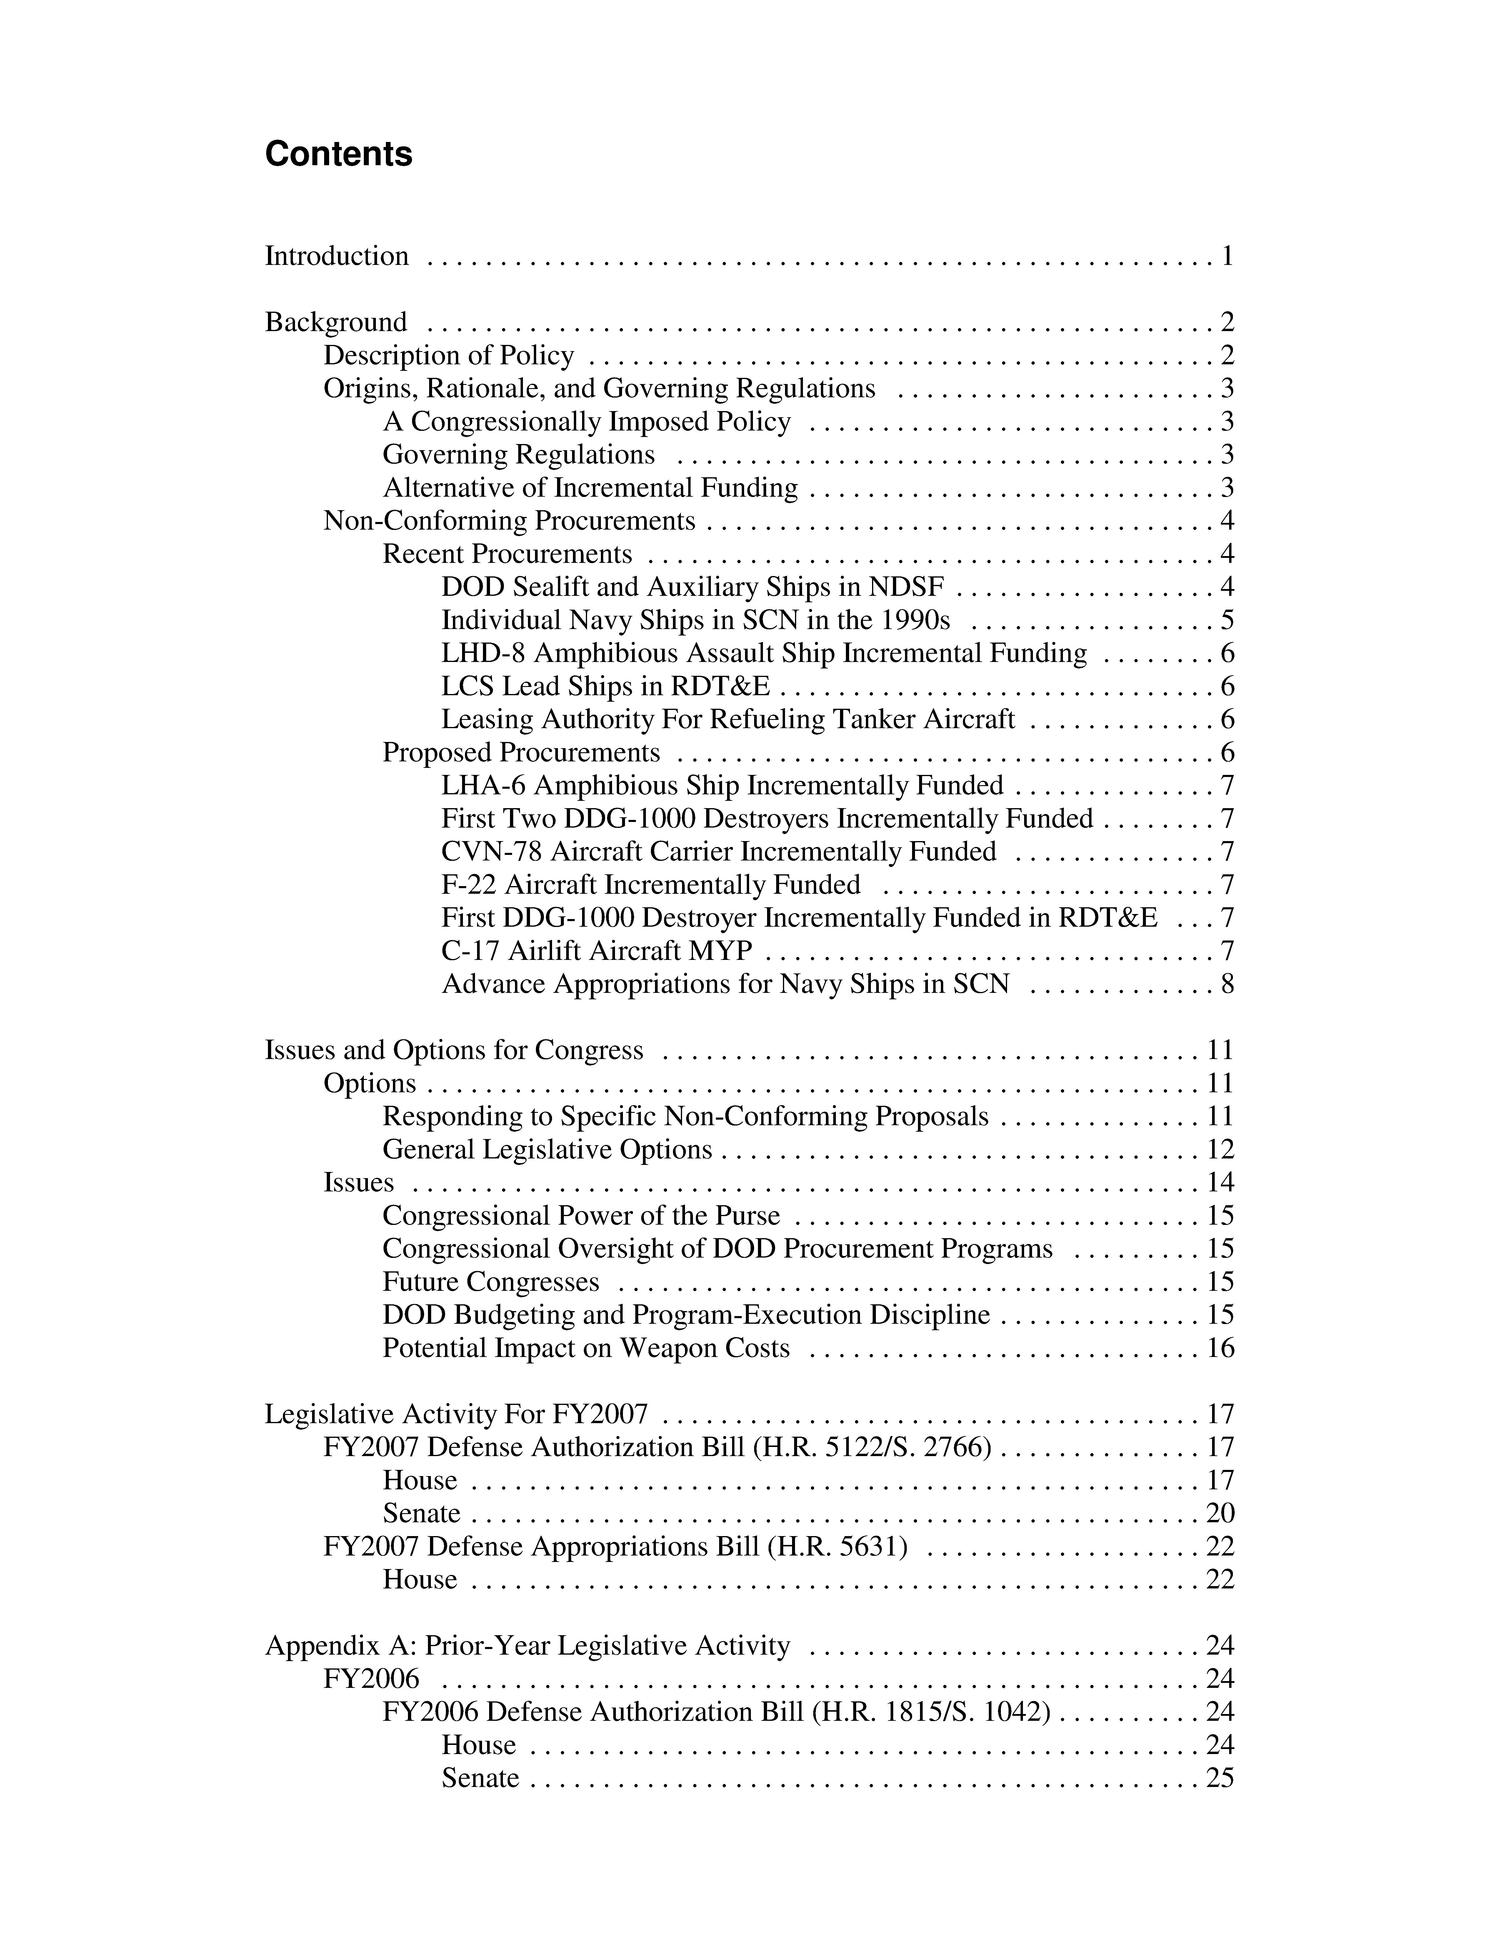 Defense Procurement: Full Funding Policy - Background, Issues, and Options for Congress
                                                
                                                    [Sequence #]: 3 of 64
                                                